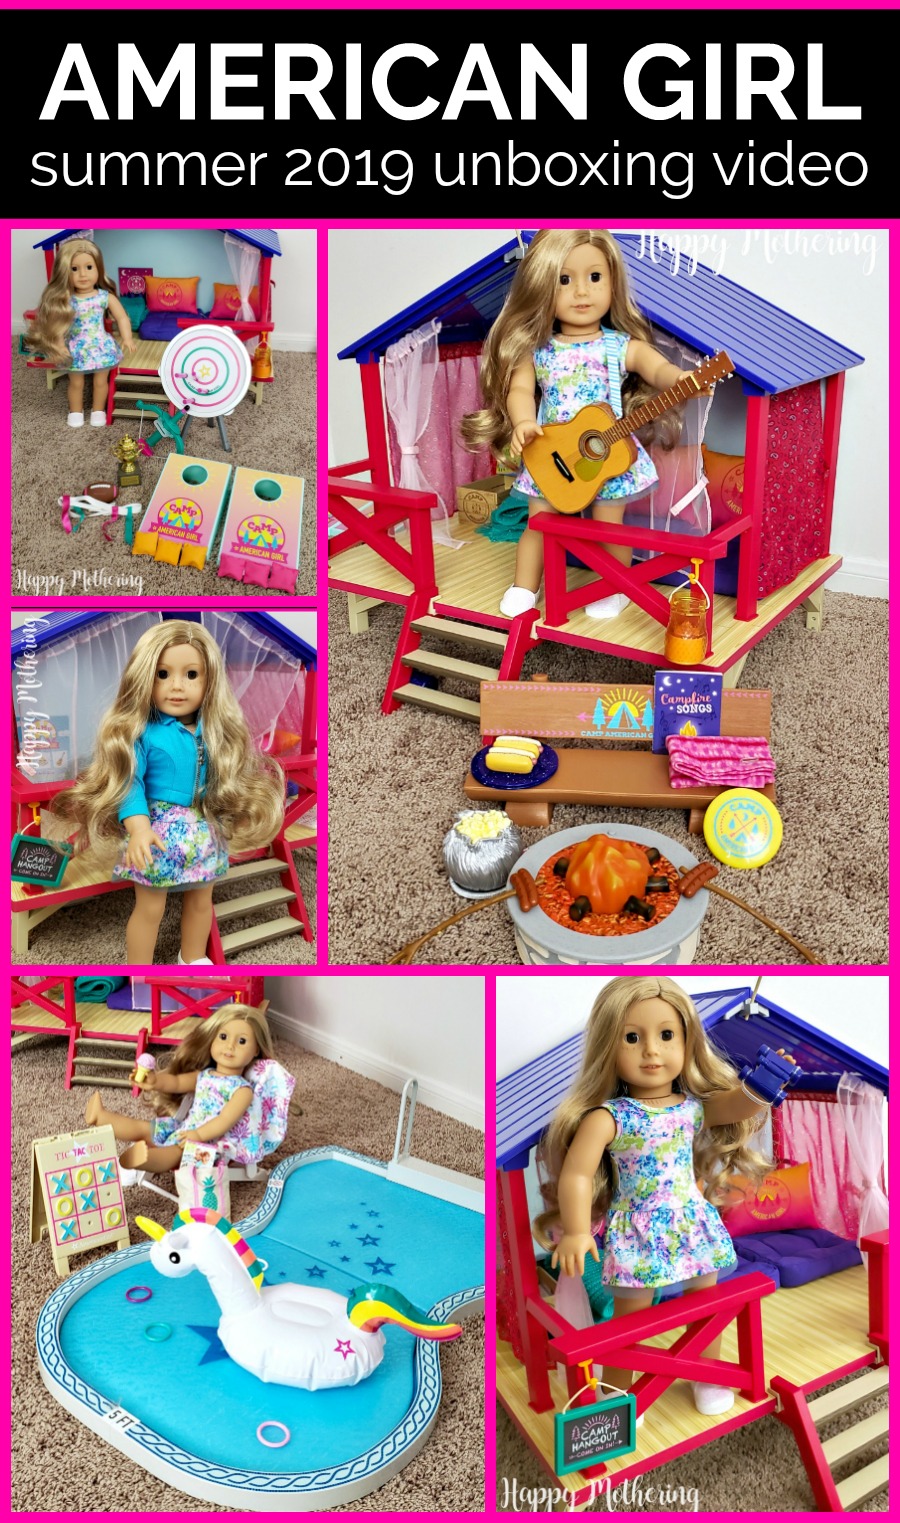 Watch Kaylee and I unbox the American Girl Summer 2019 line, including a Truly Me doll and Camp American Girl stuff. The clothes, accessories and furniture are so detailed and the quality is great!